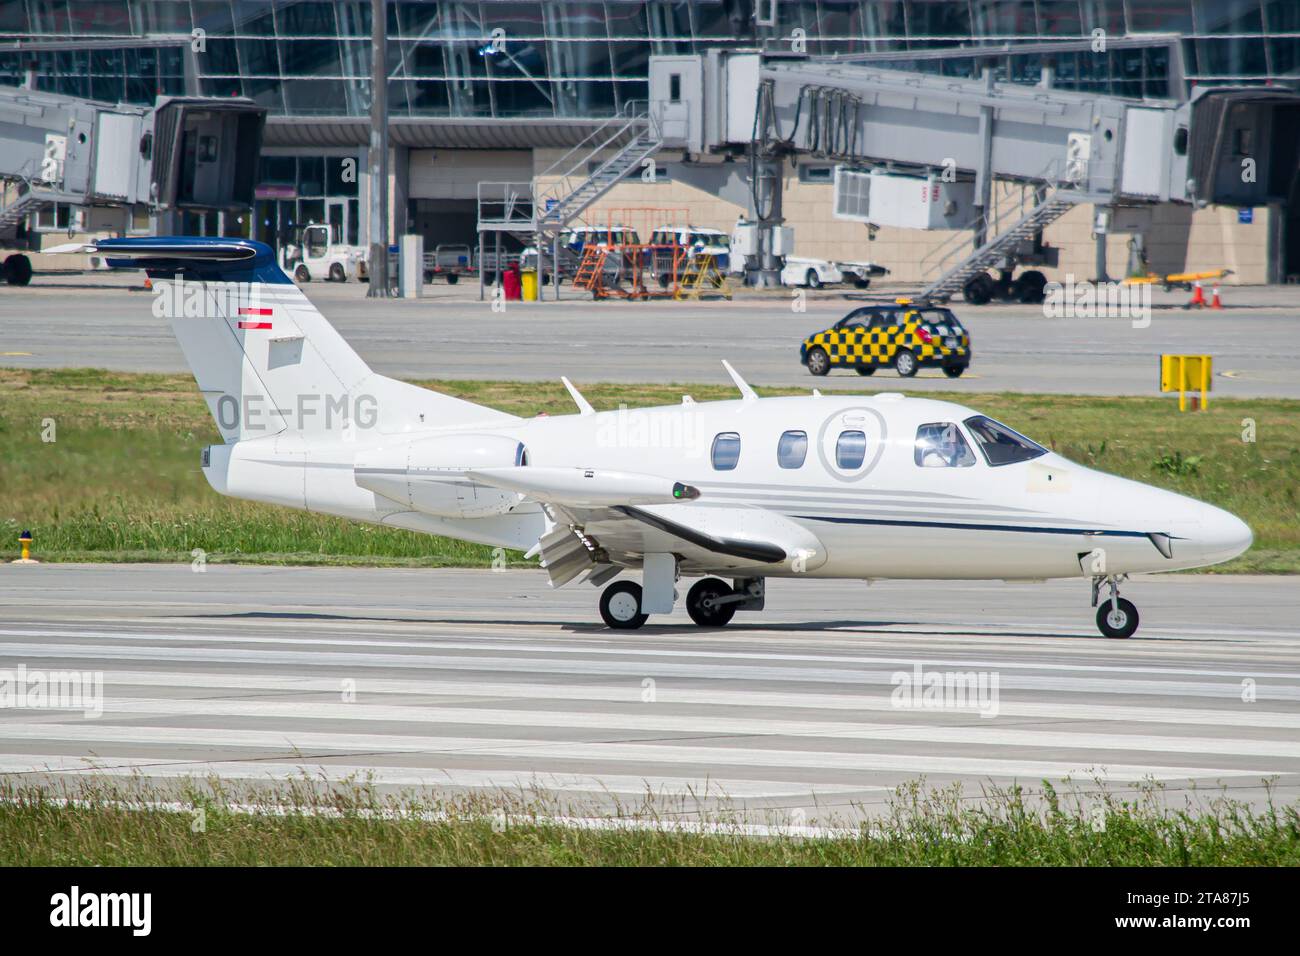 Mail Air Eclipse Aviation Eclipse 500 aircraft taxiing after landing in Lviv Stock Photo